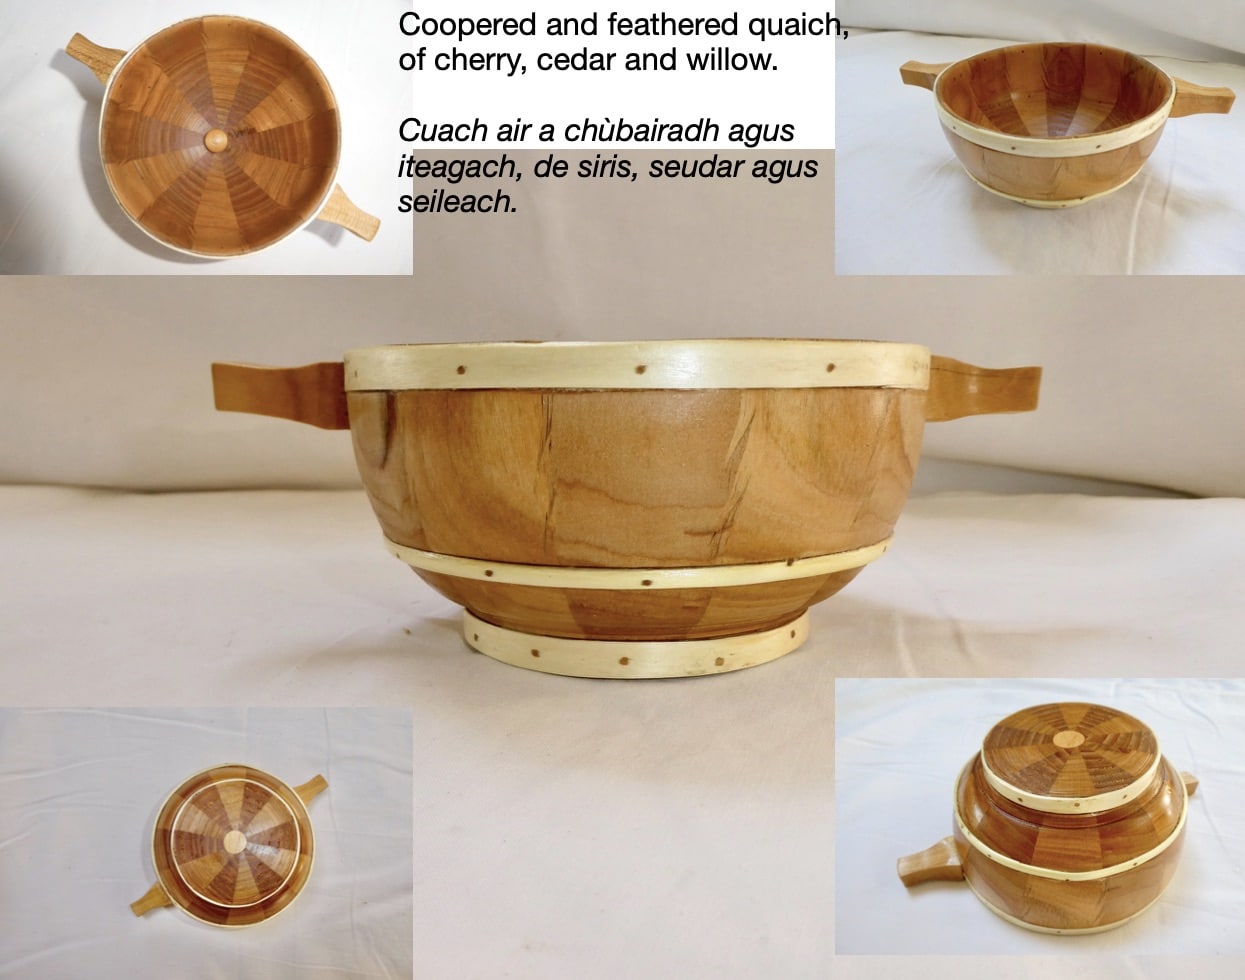 Coopered and feathered Quaich of Cherry, Cedar and Willow